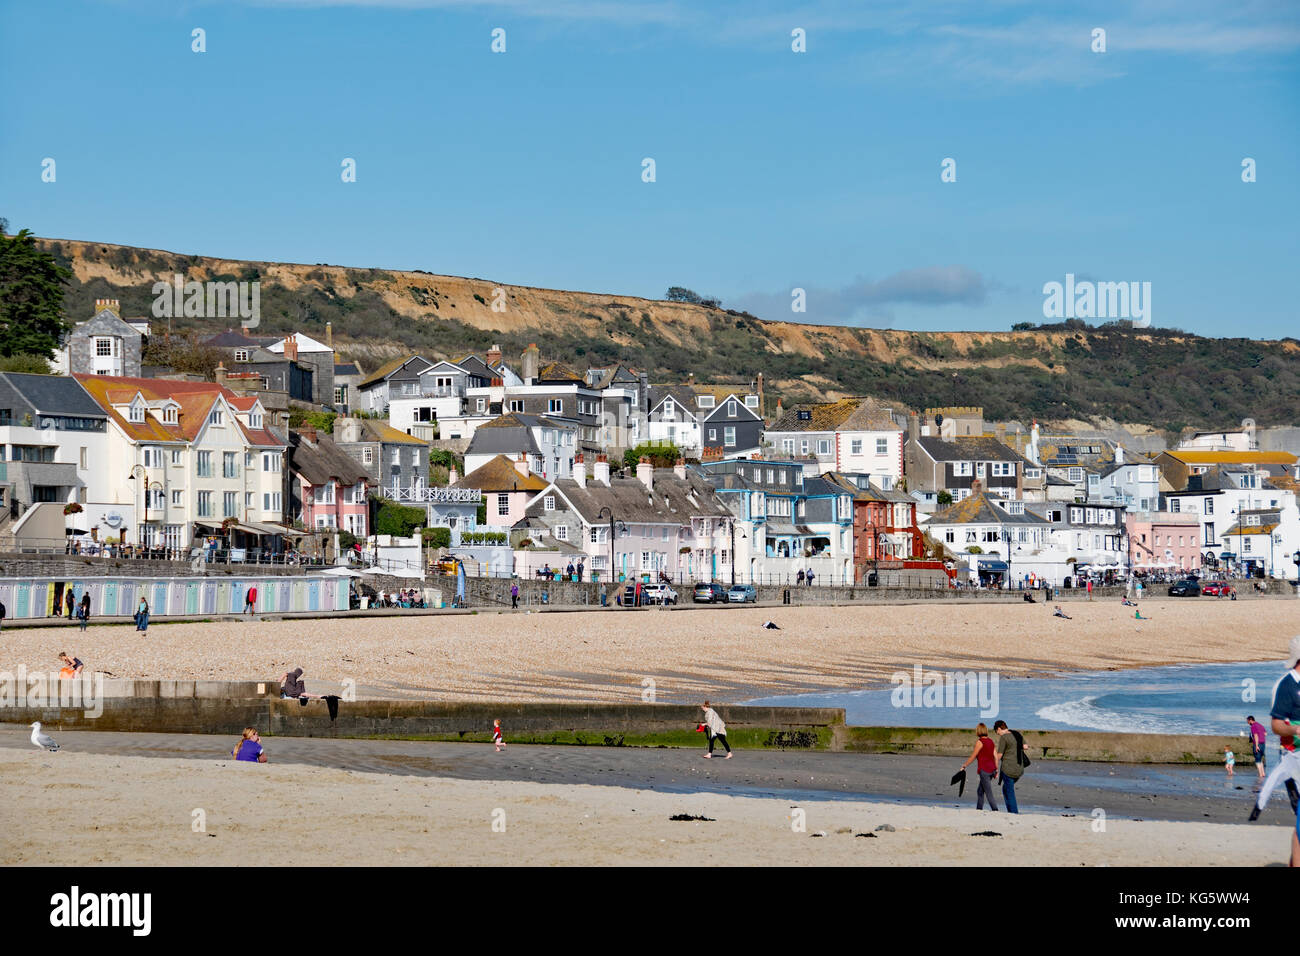 The seafront at Lyme Regis, West Dorset, UK Stock Photo